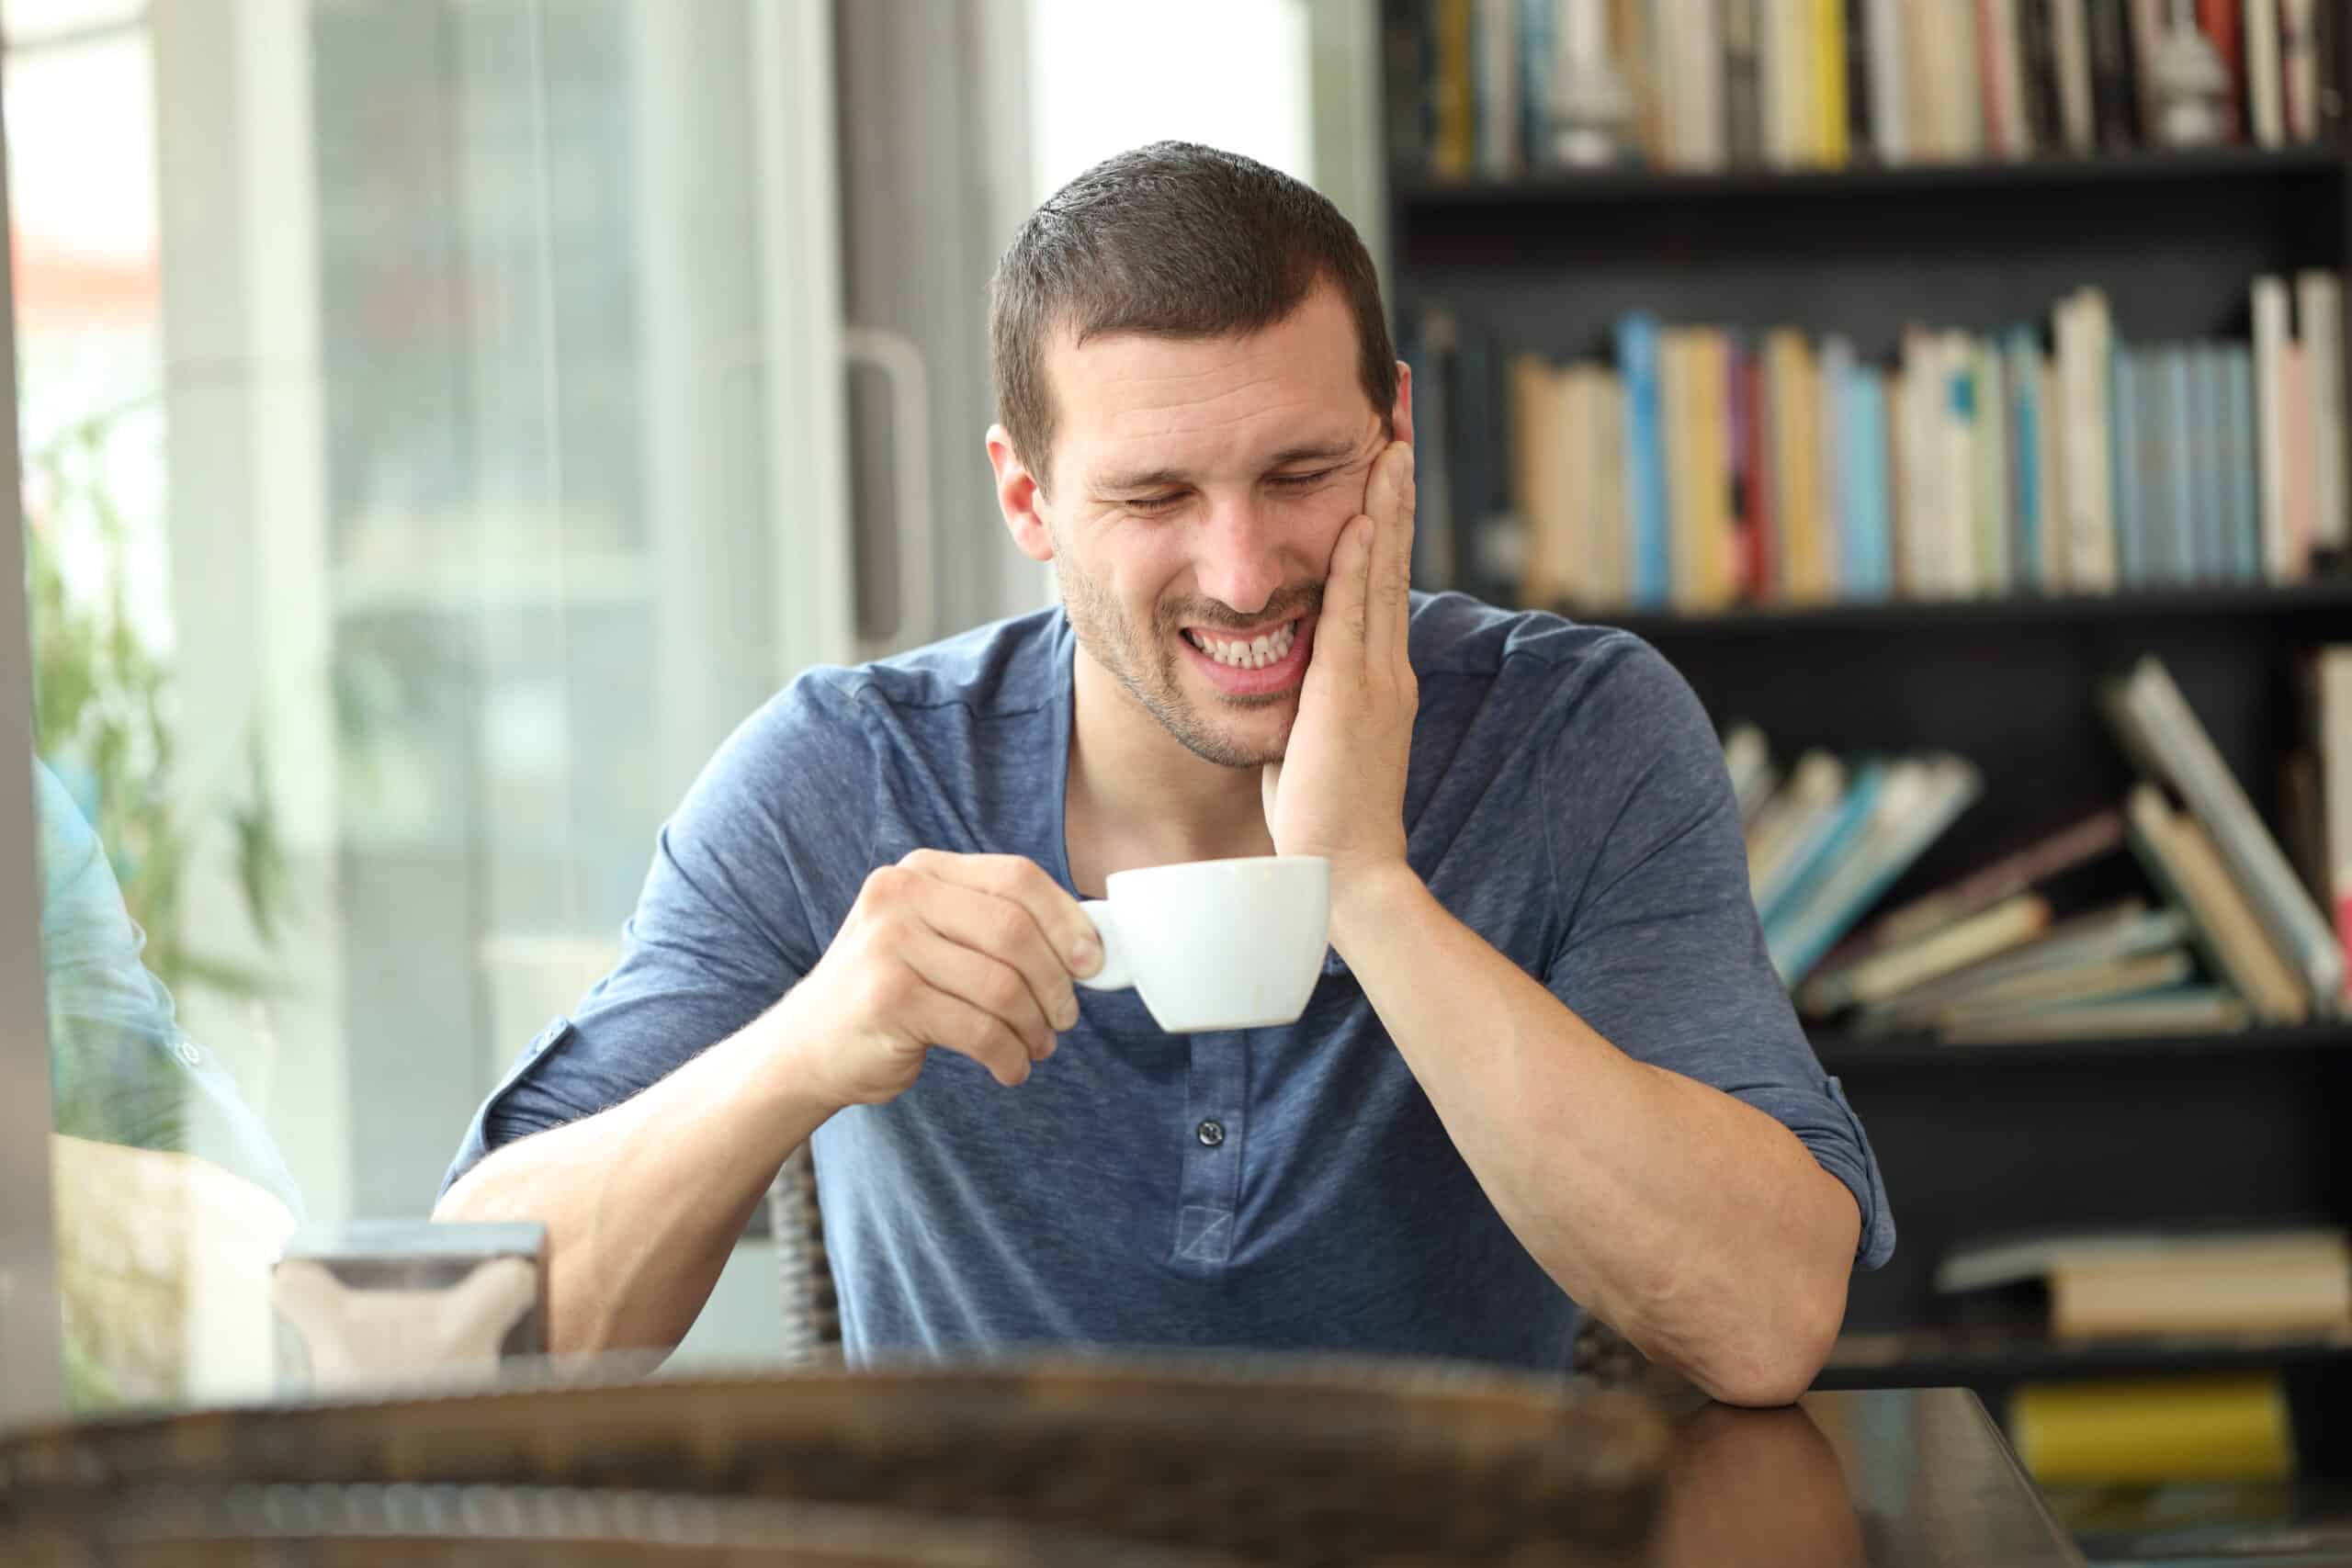  man complaining suffering tooth ache after drinking hot coffee